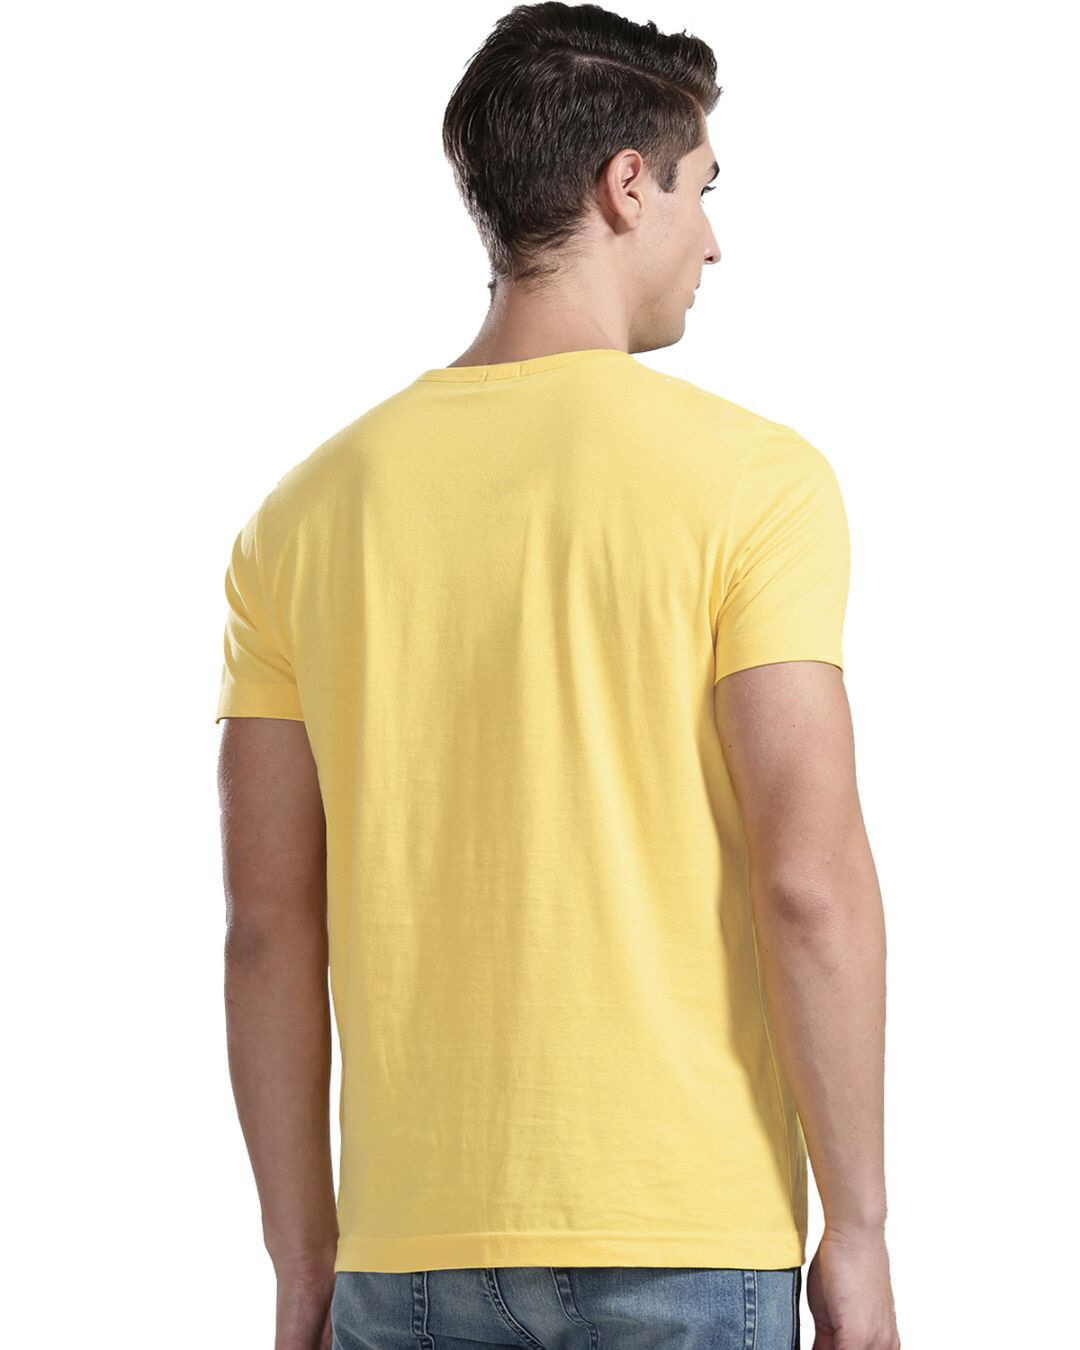 Shop Be Yourself Printed T-shirts for Men's-Back